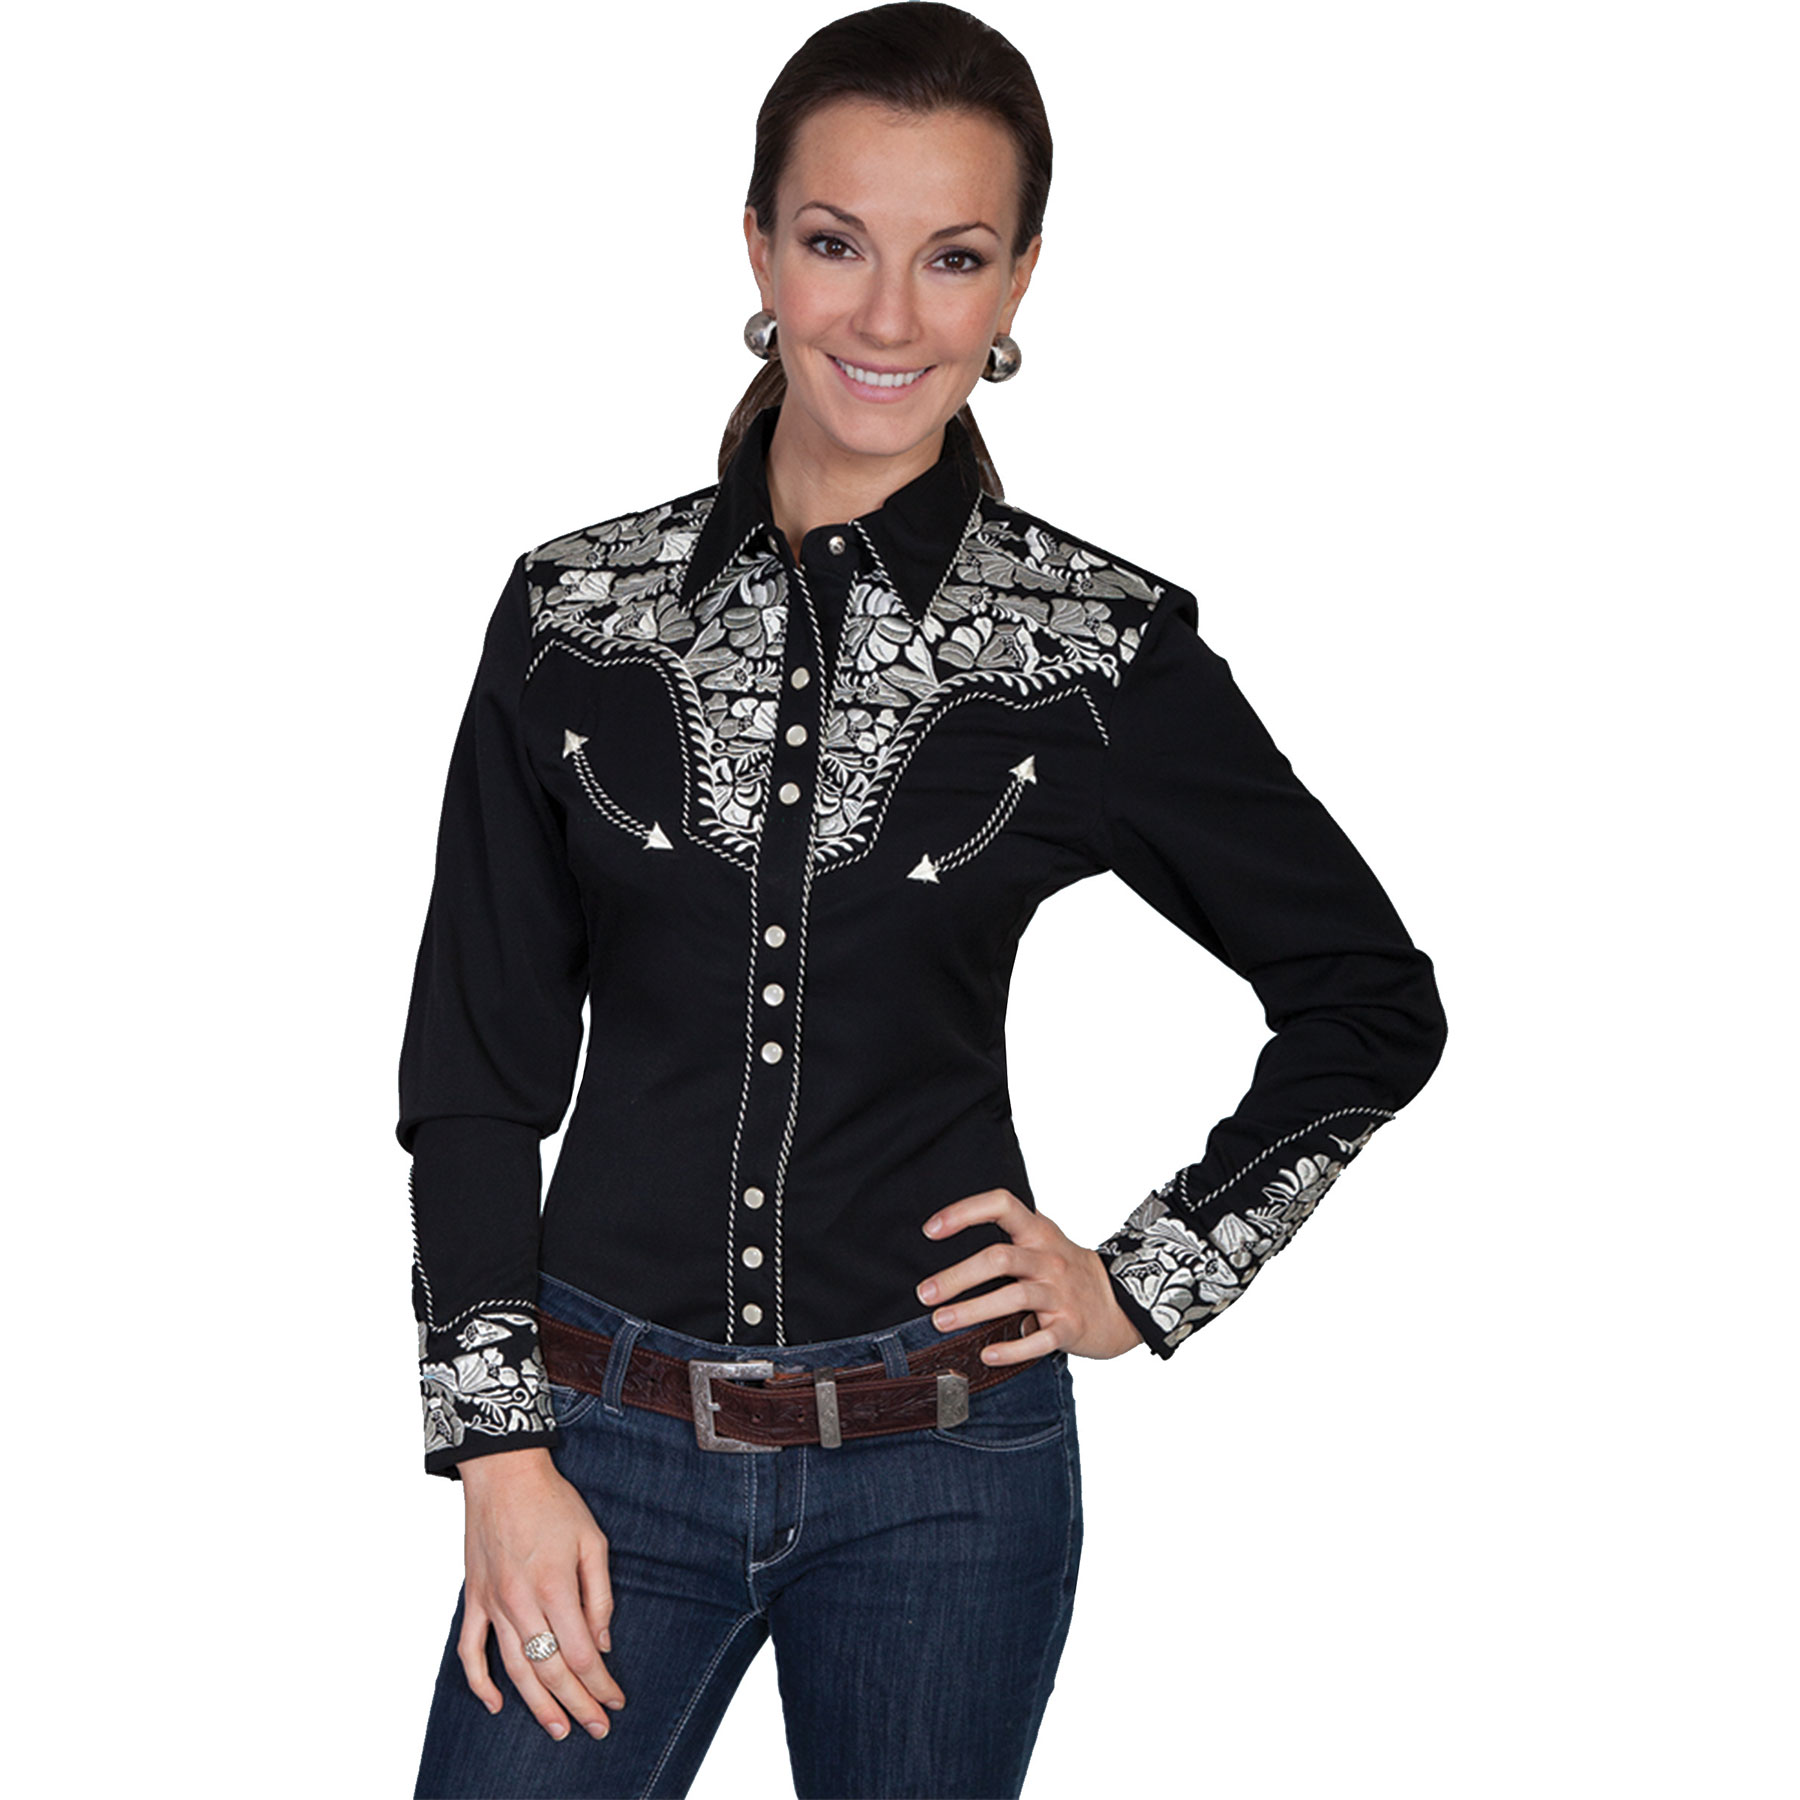 Pungo Ridge - Scully Ladies Long Sleeve Shirt w/Floral Tooled ...